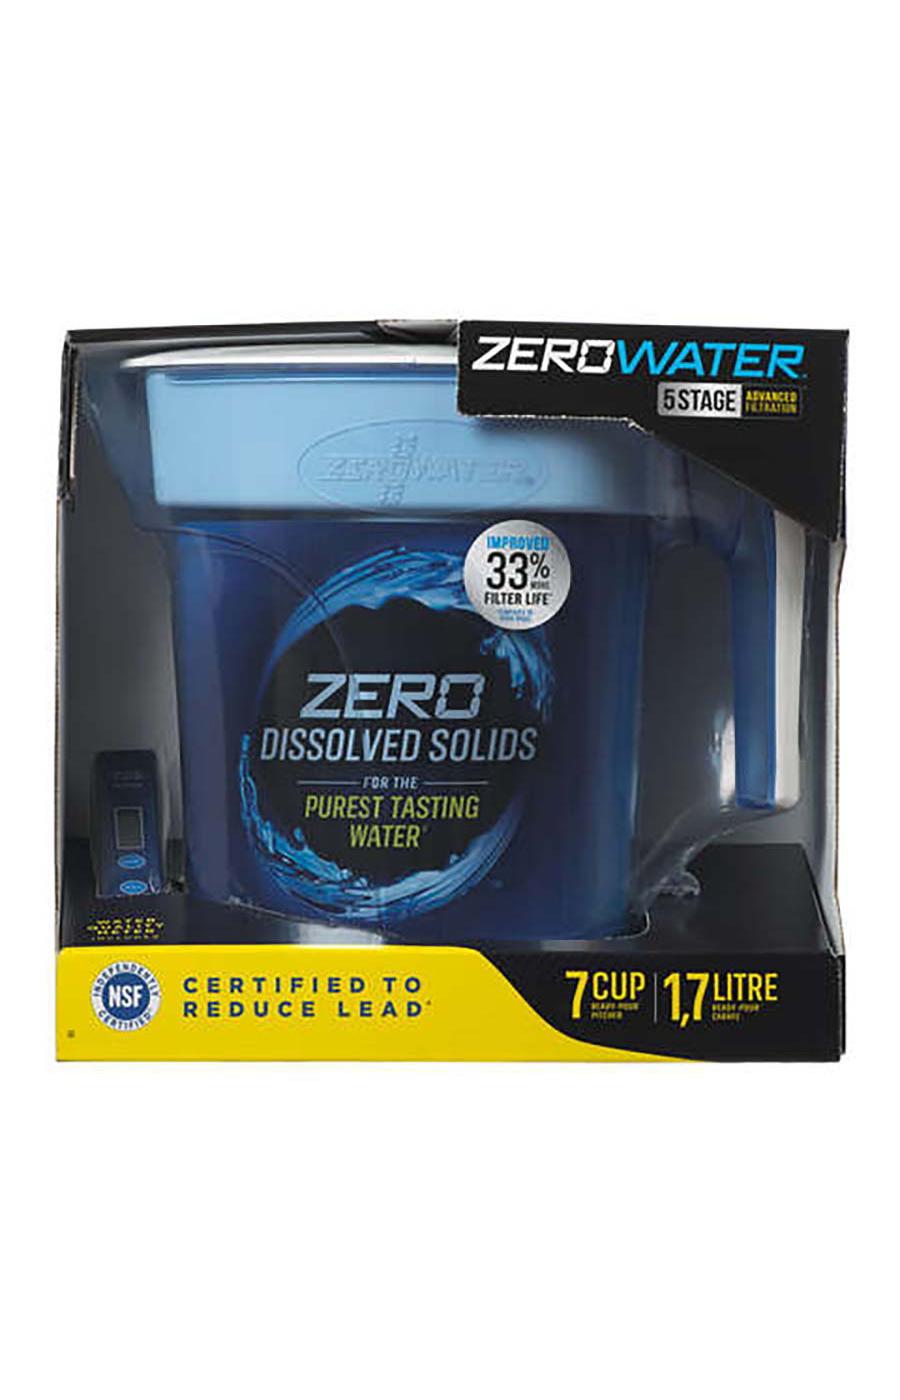 ZeroWater 5-Stage Water Filtration Pitcher; image 1 of 2